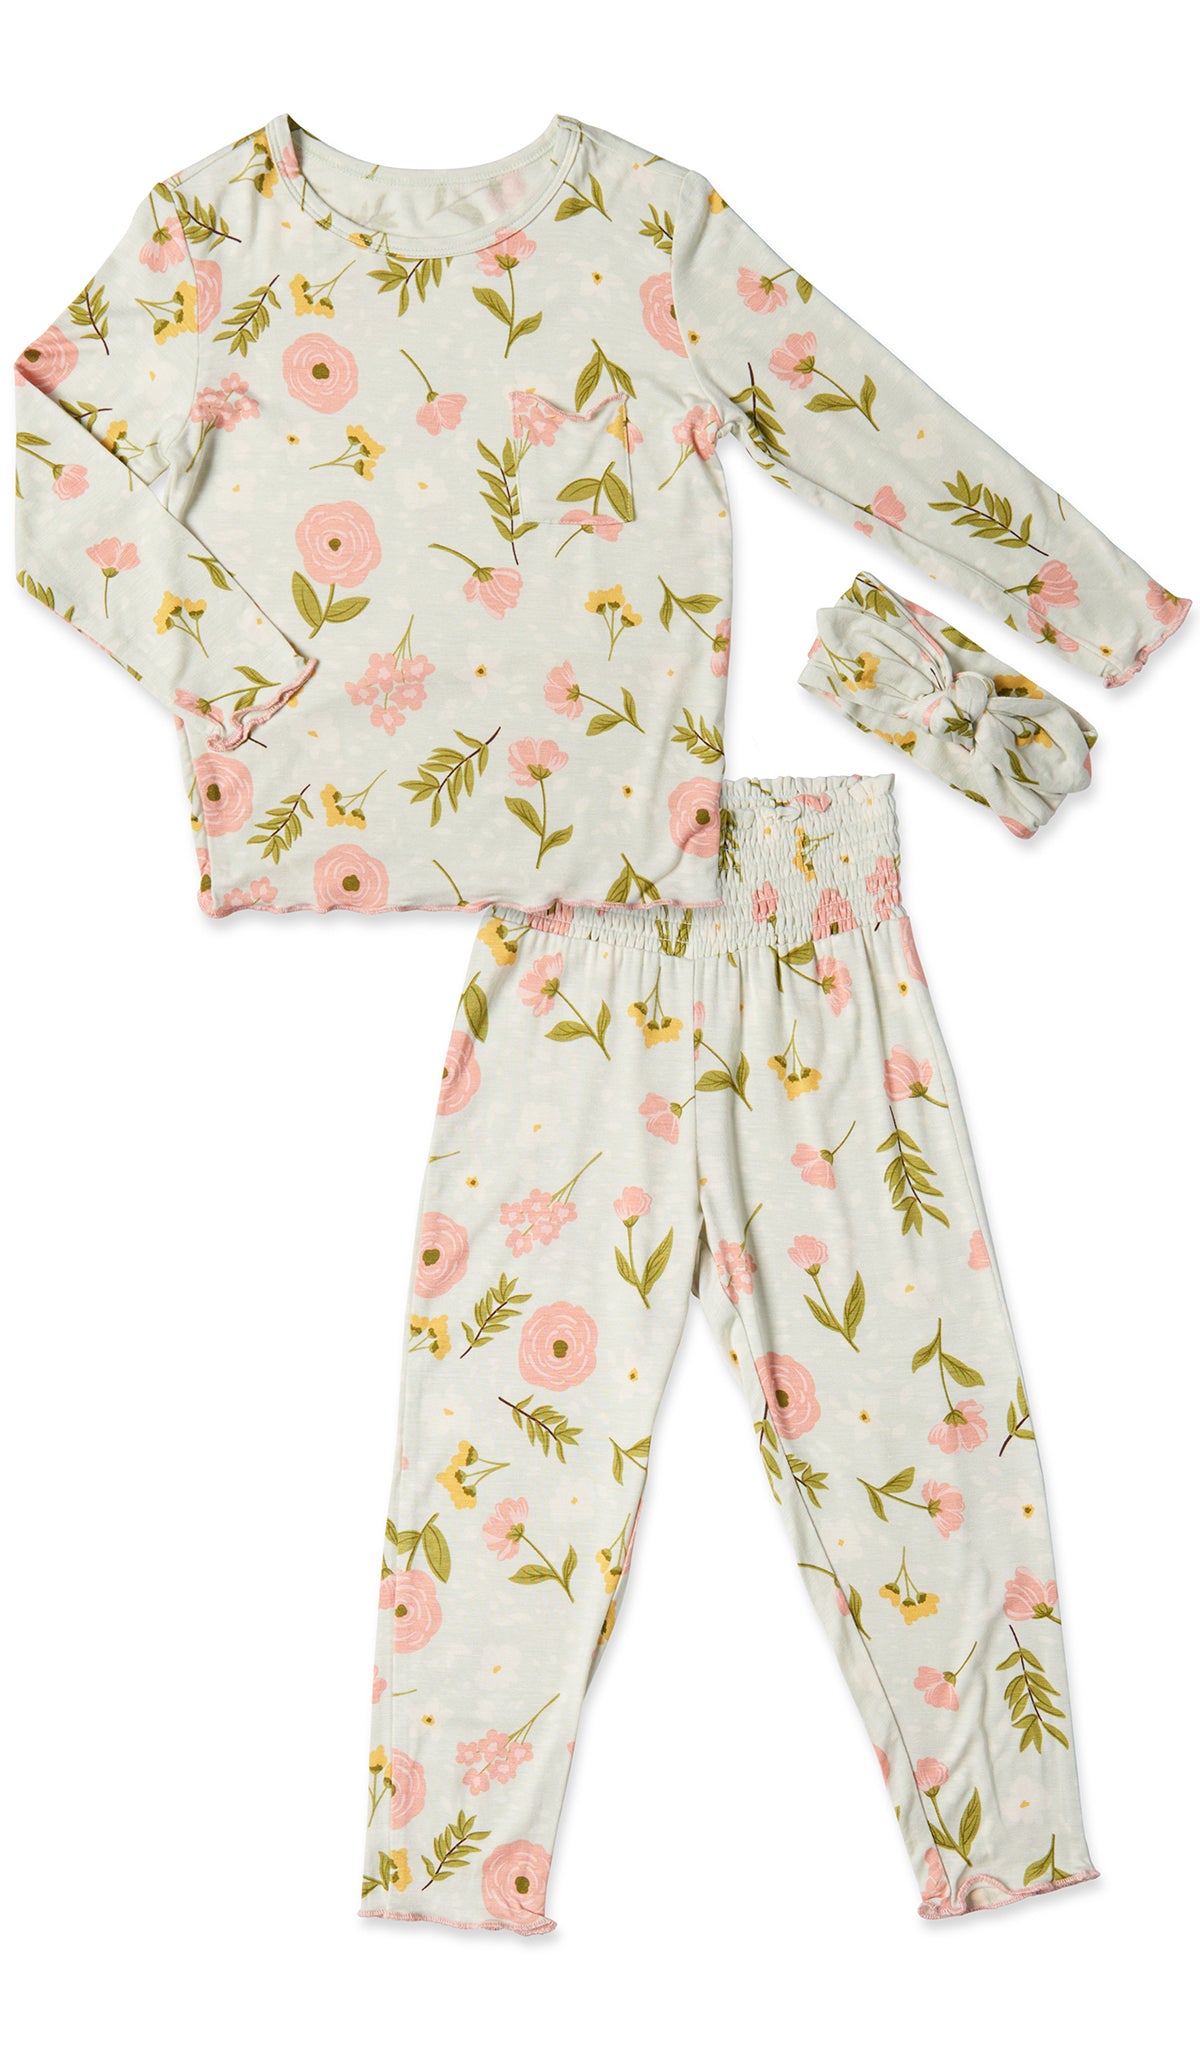 Carnation Charlie Kids 3-Piece Pant PJ. Long sleeve top with smocked waistband pant and matching headwrap. Lettuce trim detail on sleeve edge, top and pant hem.